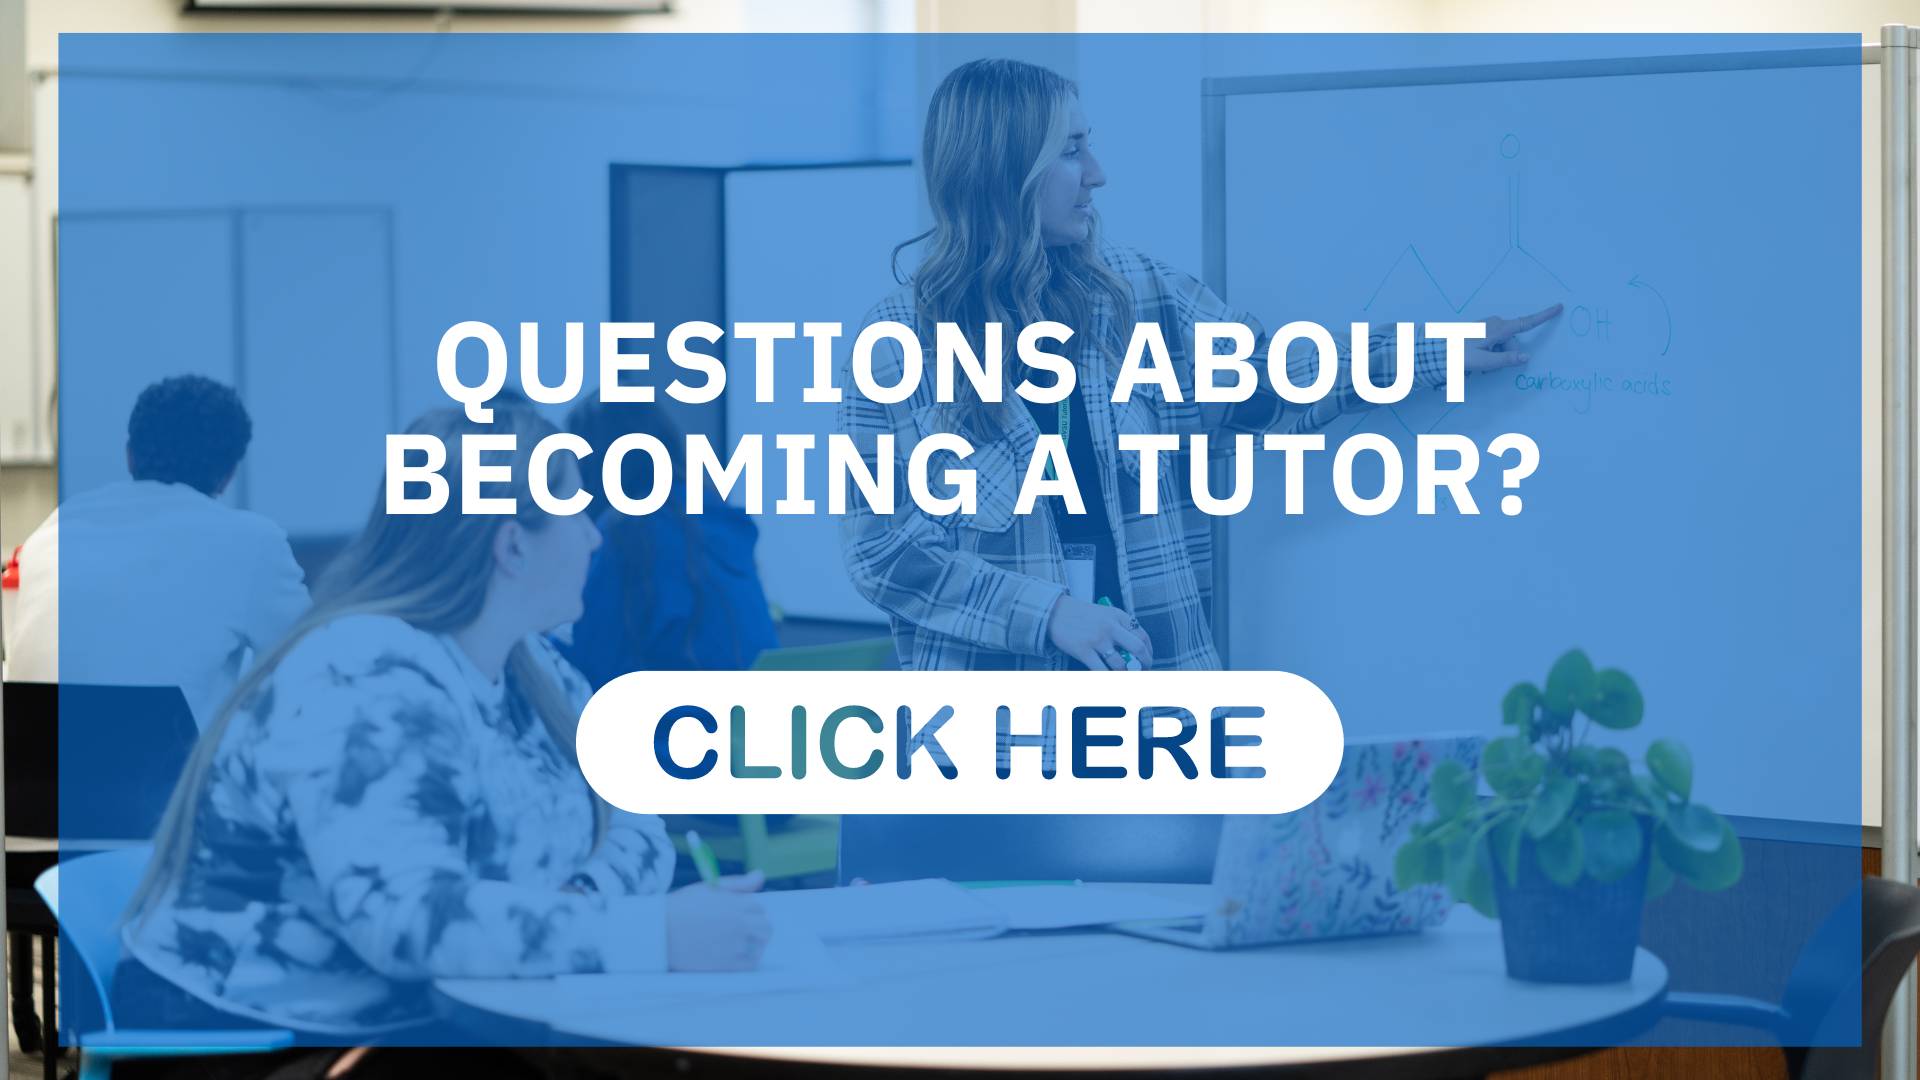 Questions about becoming a tutor? Click here